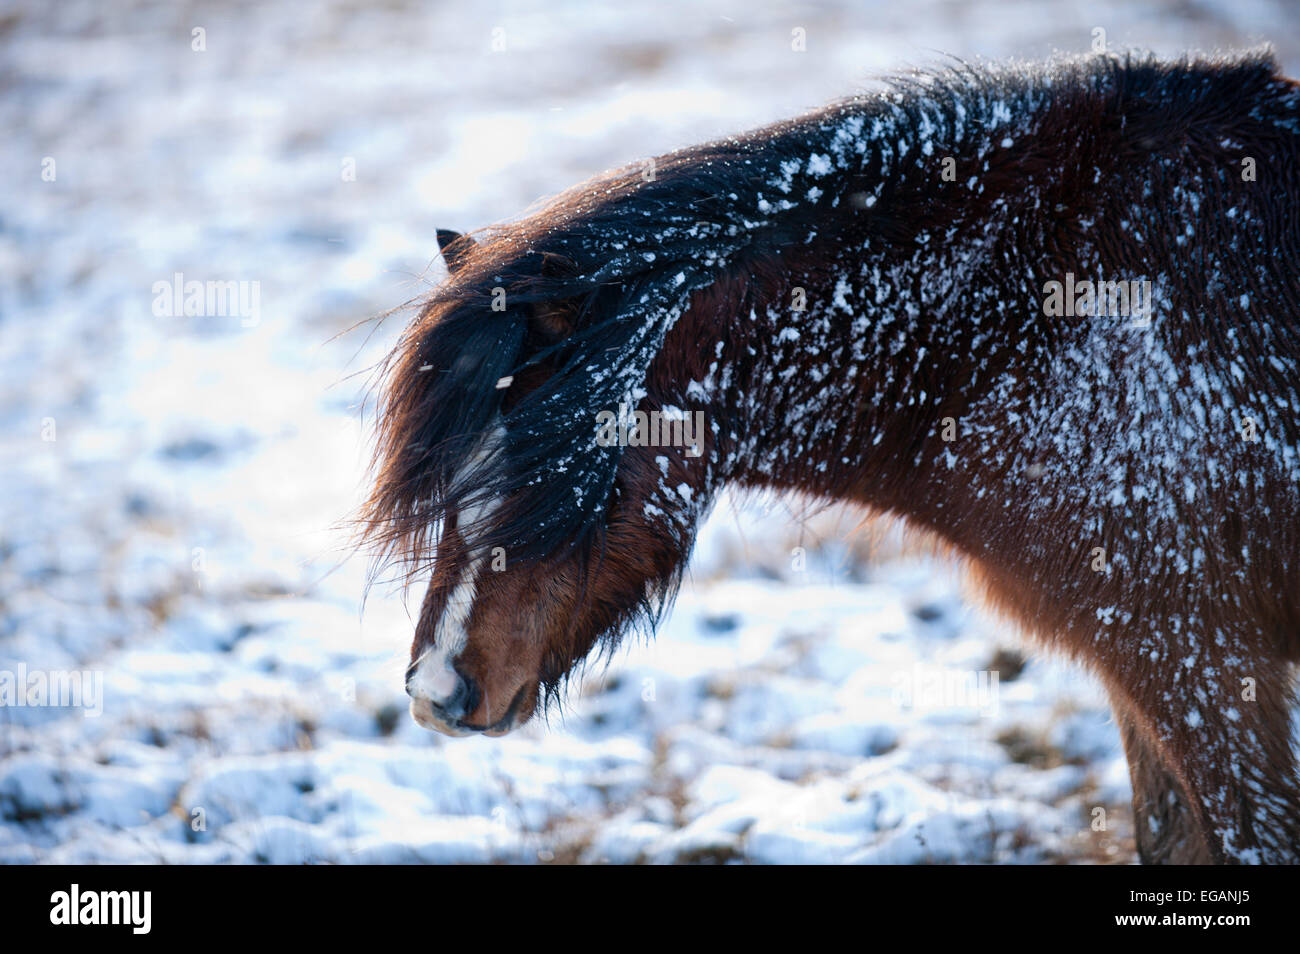 Mynydd Epynt, Powys, Wales, UK. 21st February, 2015.  Snow falls on high ground in Mid Wales. Welsh ponies forage for grass under the snow on the Mynydd Epynt high moorland. Credit:  Graham M. Lawrence/Alamy Live News. Stock Photo